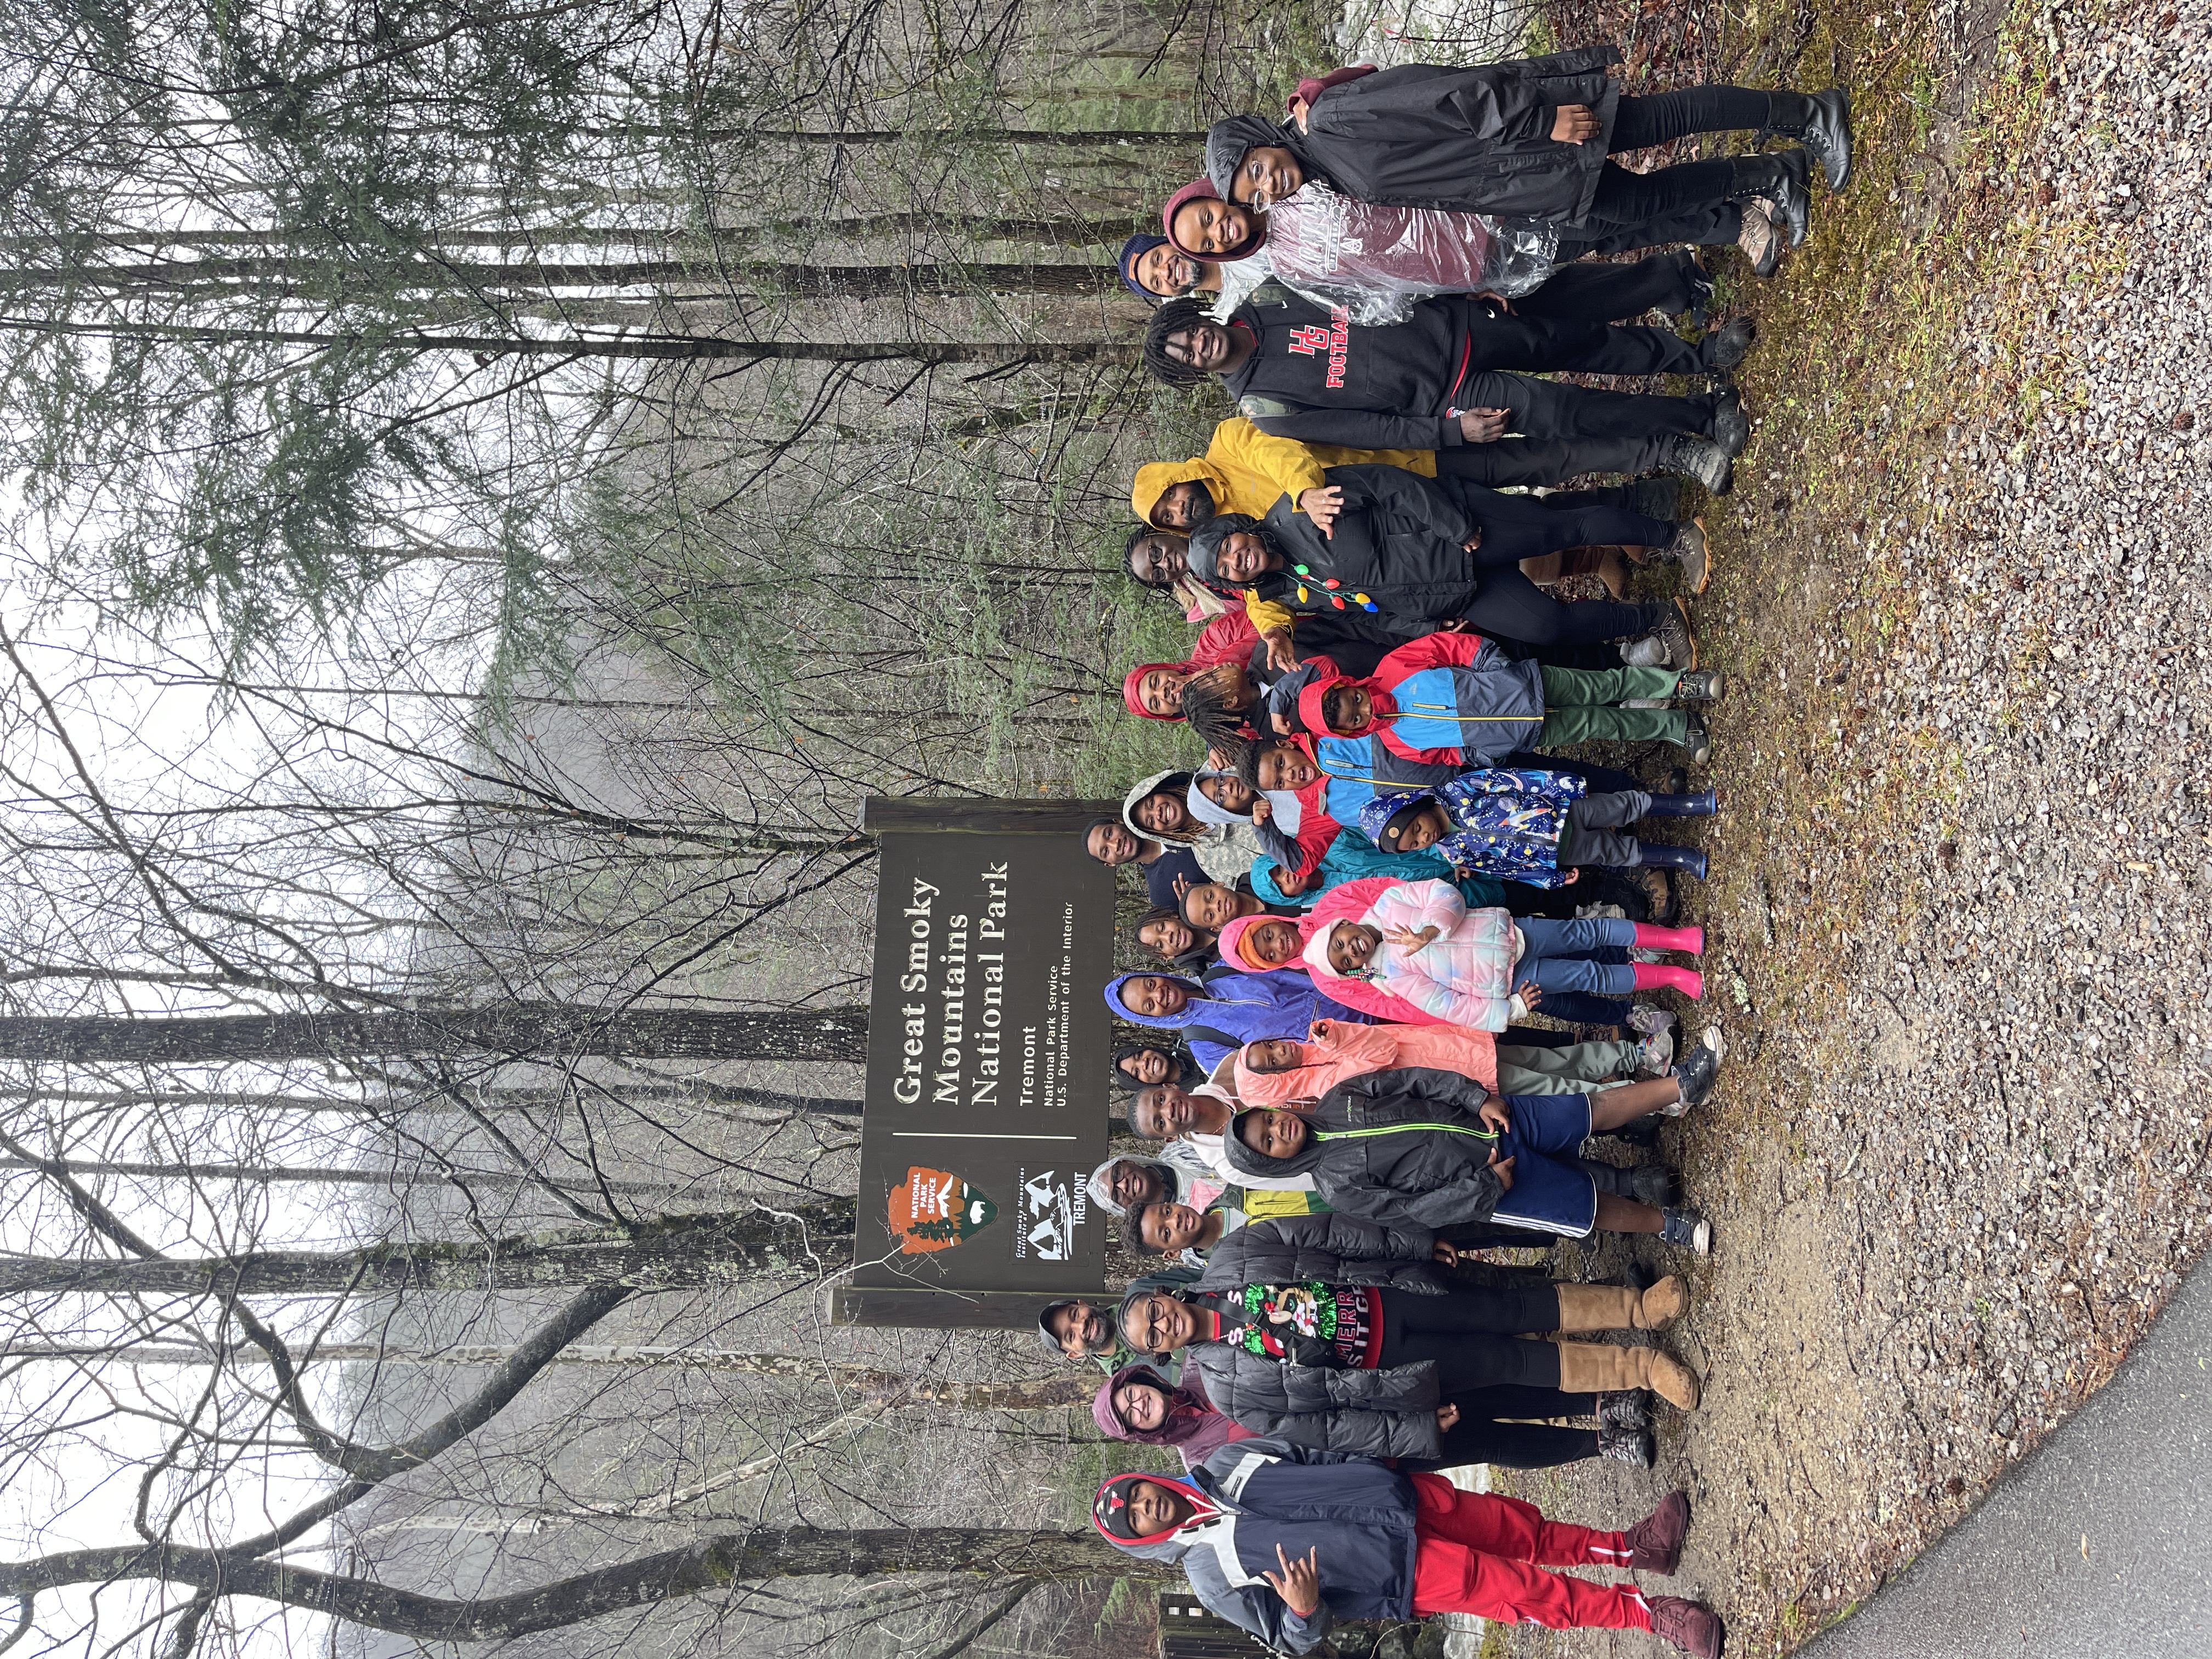 A large group of many ages stands in front of a Smoky Mountains sign